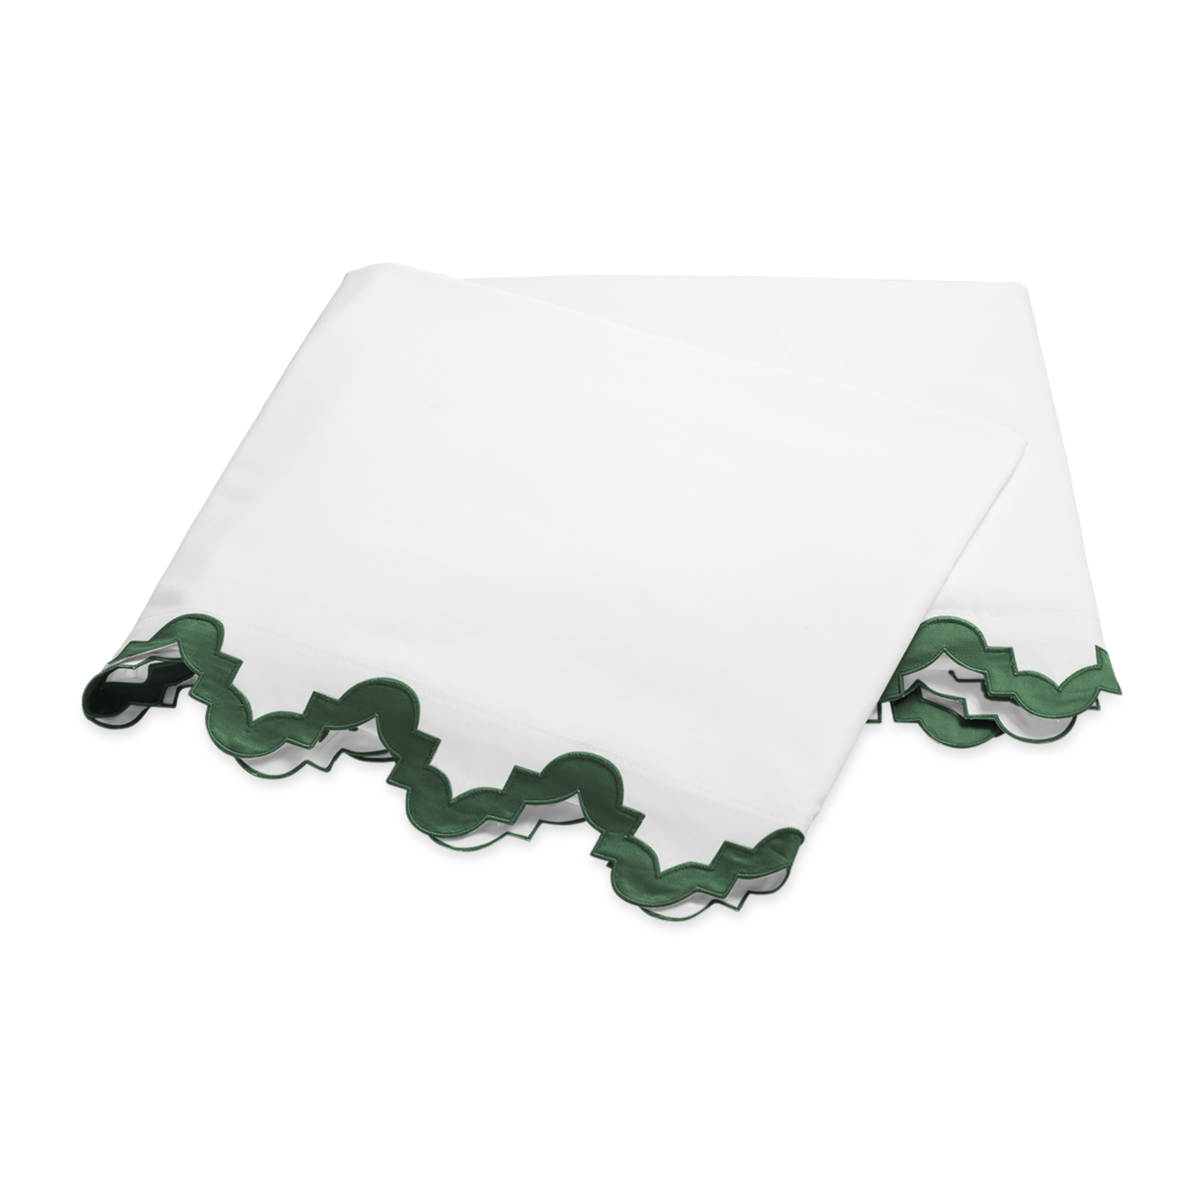 Folded Flat Sheet of Matouk Aziza Bedding in Green Color